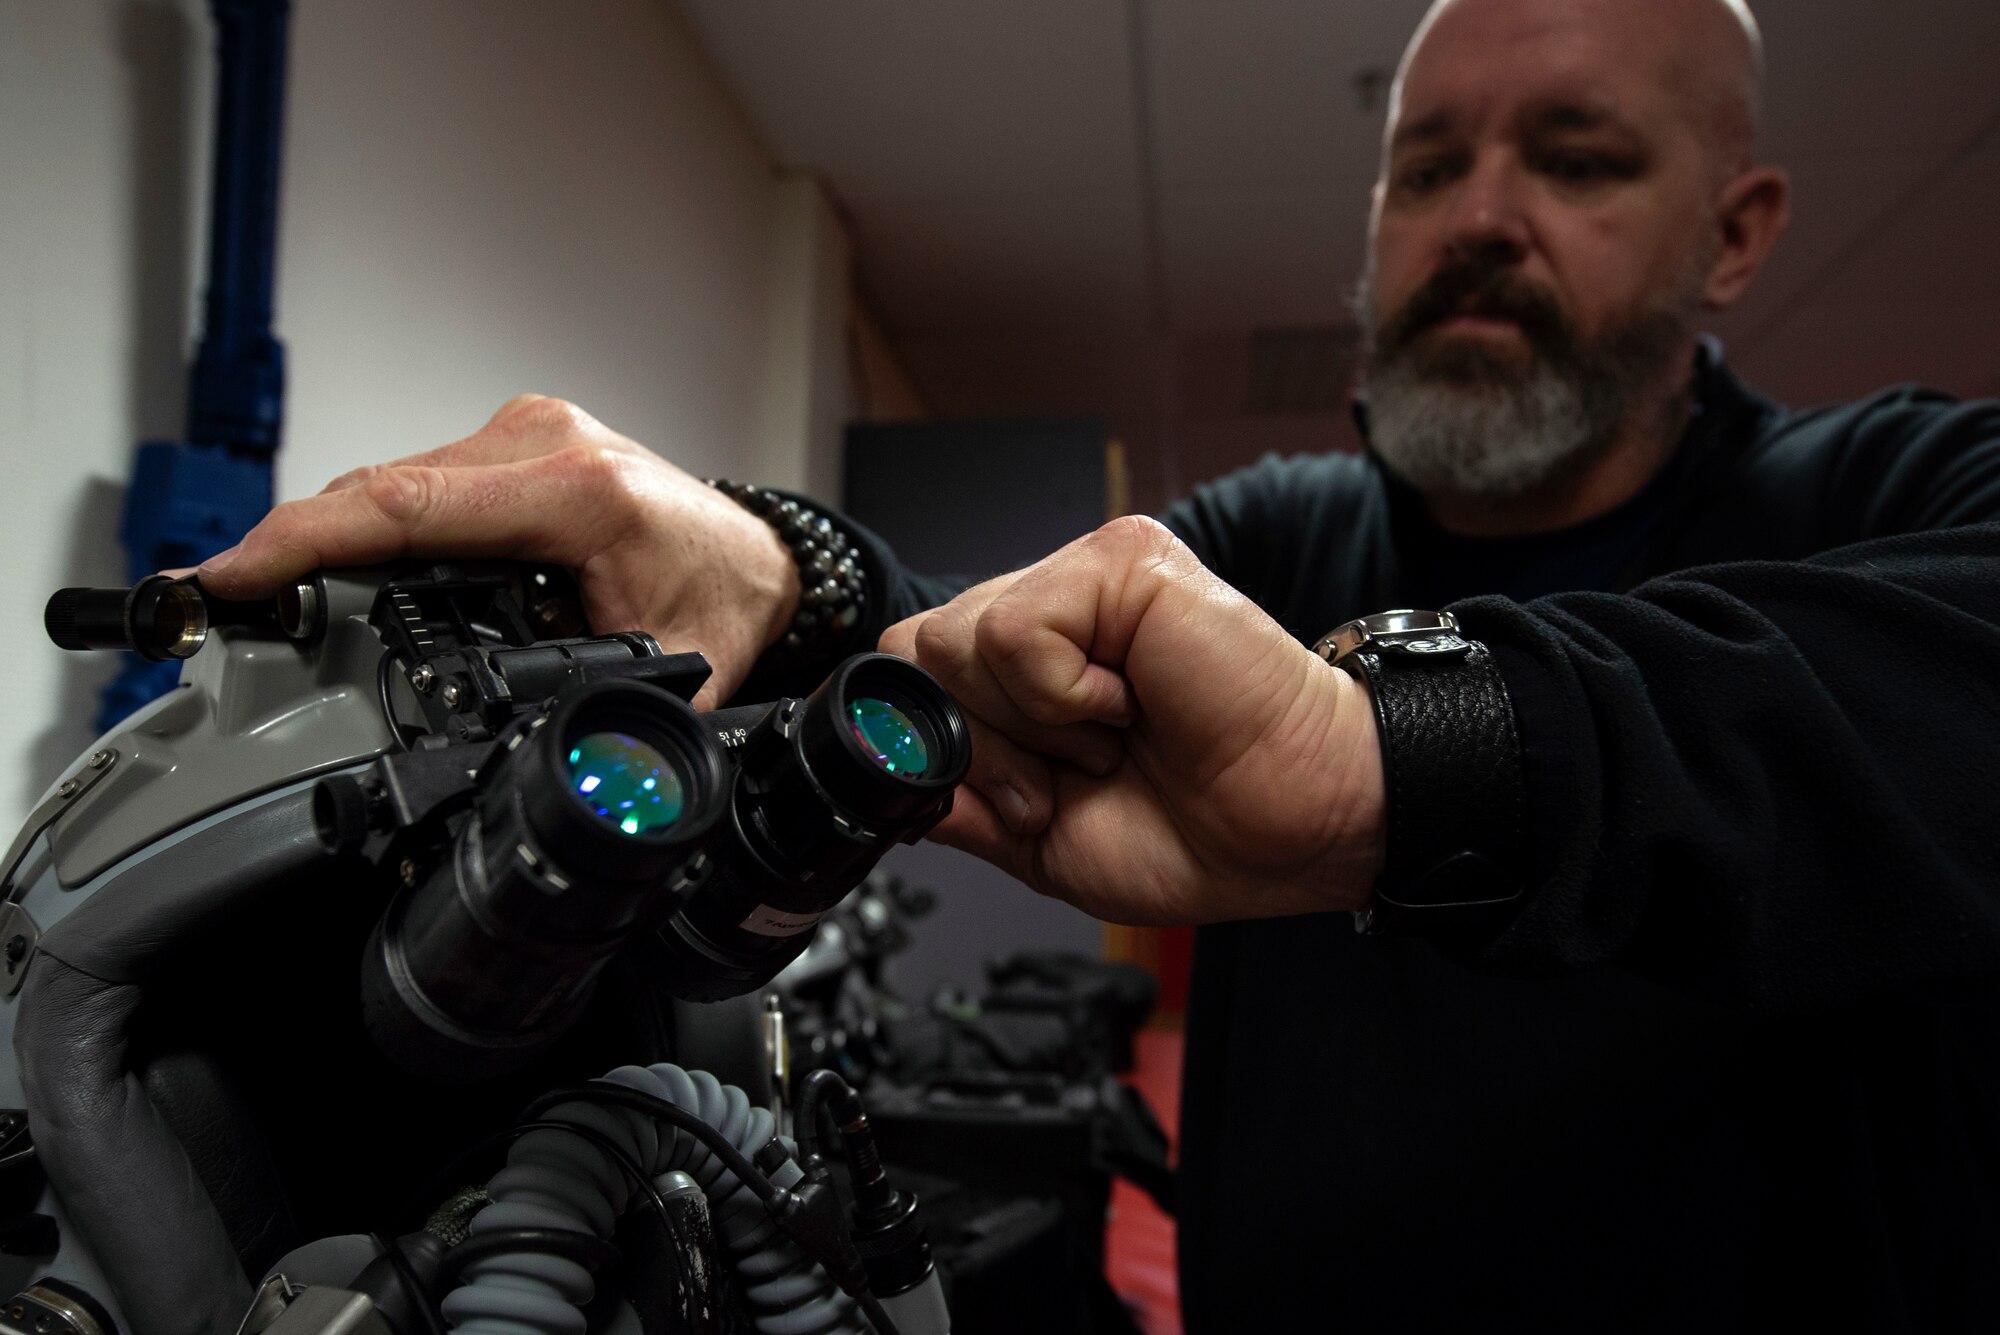 Bill Talton, 52nd Operations Support Squadron aircraft survival equipment repairer, clears out settings on night-vision goggles at Spangdahlem Air Base, Germany, March 4, 2020. Pilots adjust the goggles to match their own eyesight. The 52nd OSS Aircrew Flight Equipment flight is responsible for taking care of all gear pilots need, such as survival kits, parachutes, anti-g suits, and helmets. (U.S. Air Force photo by Senior Airman Valerie R. Seelye)